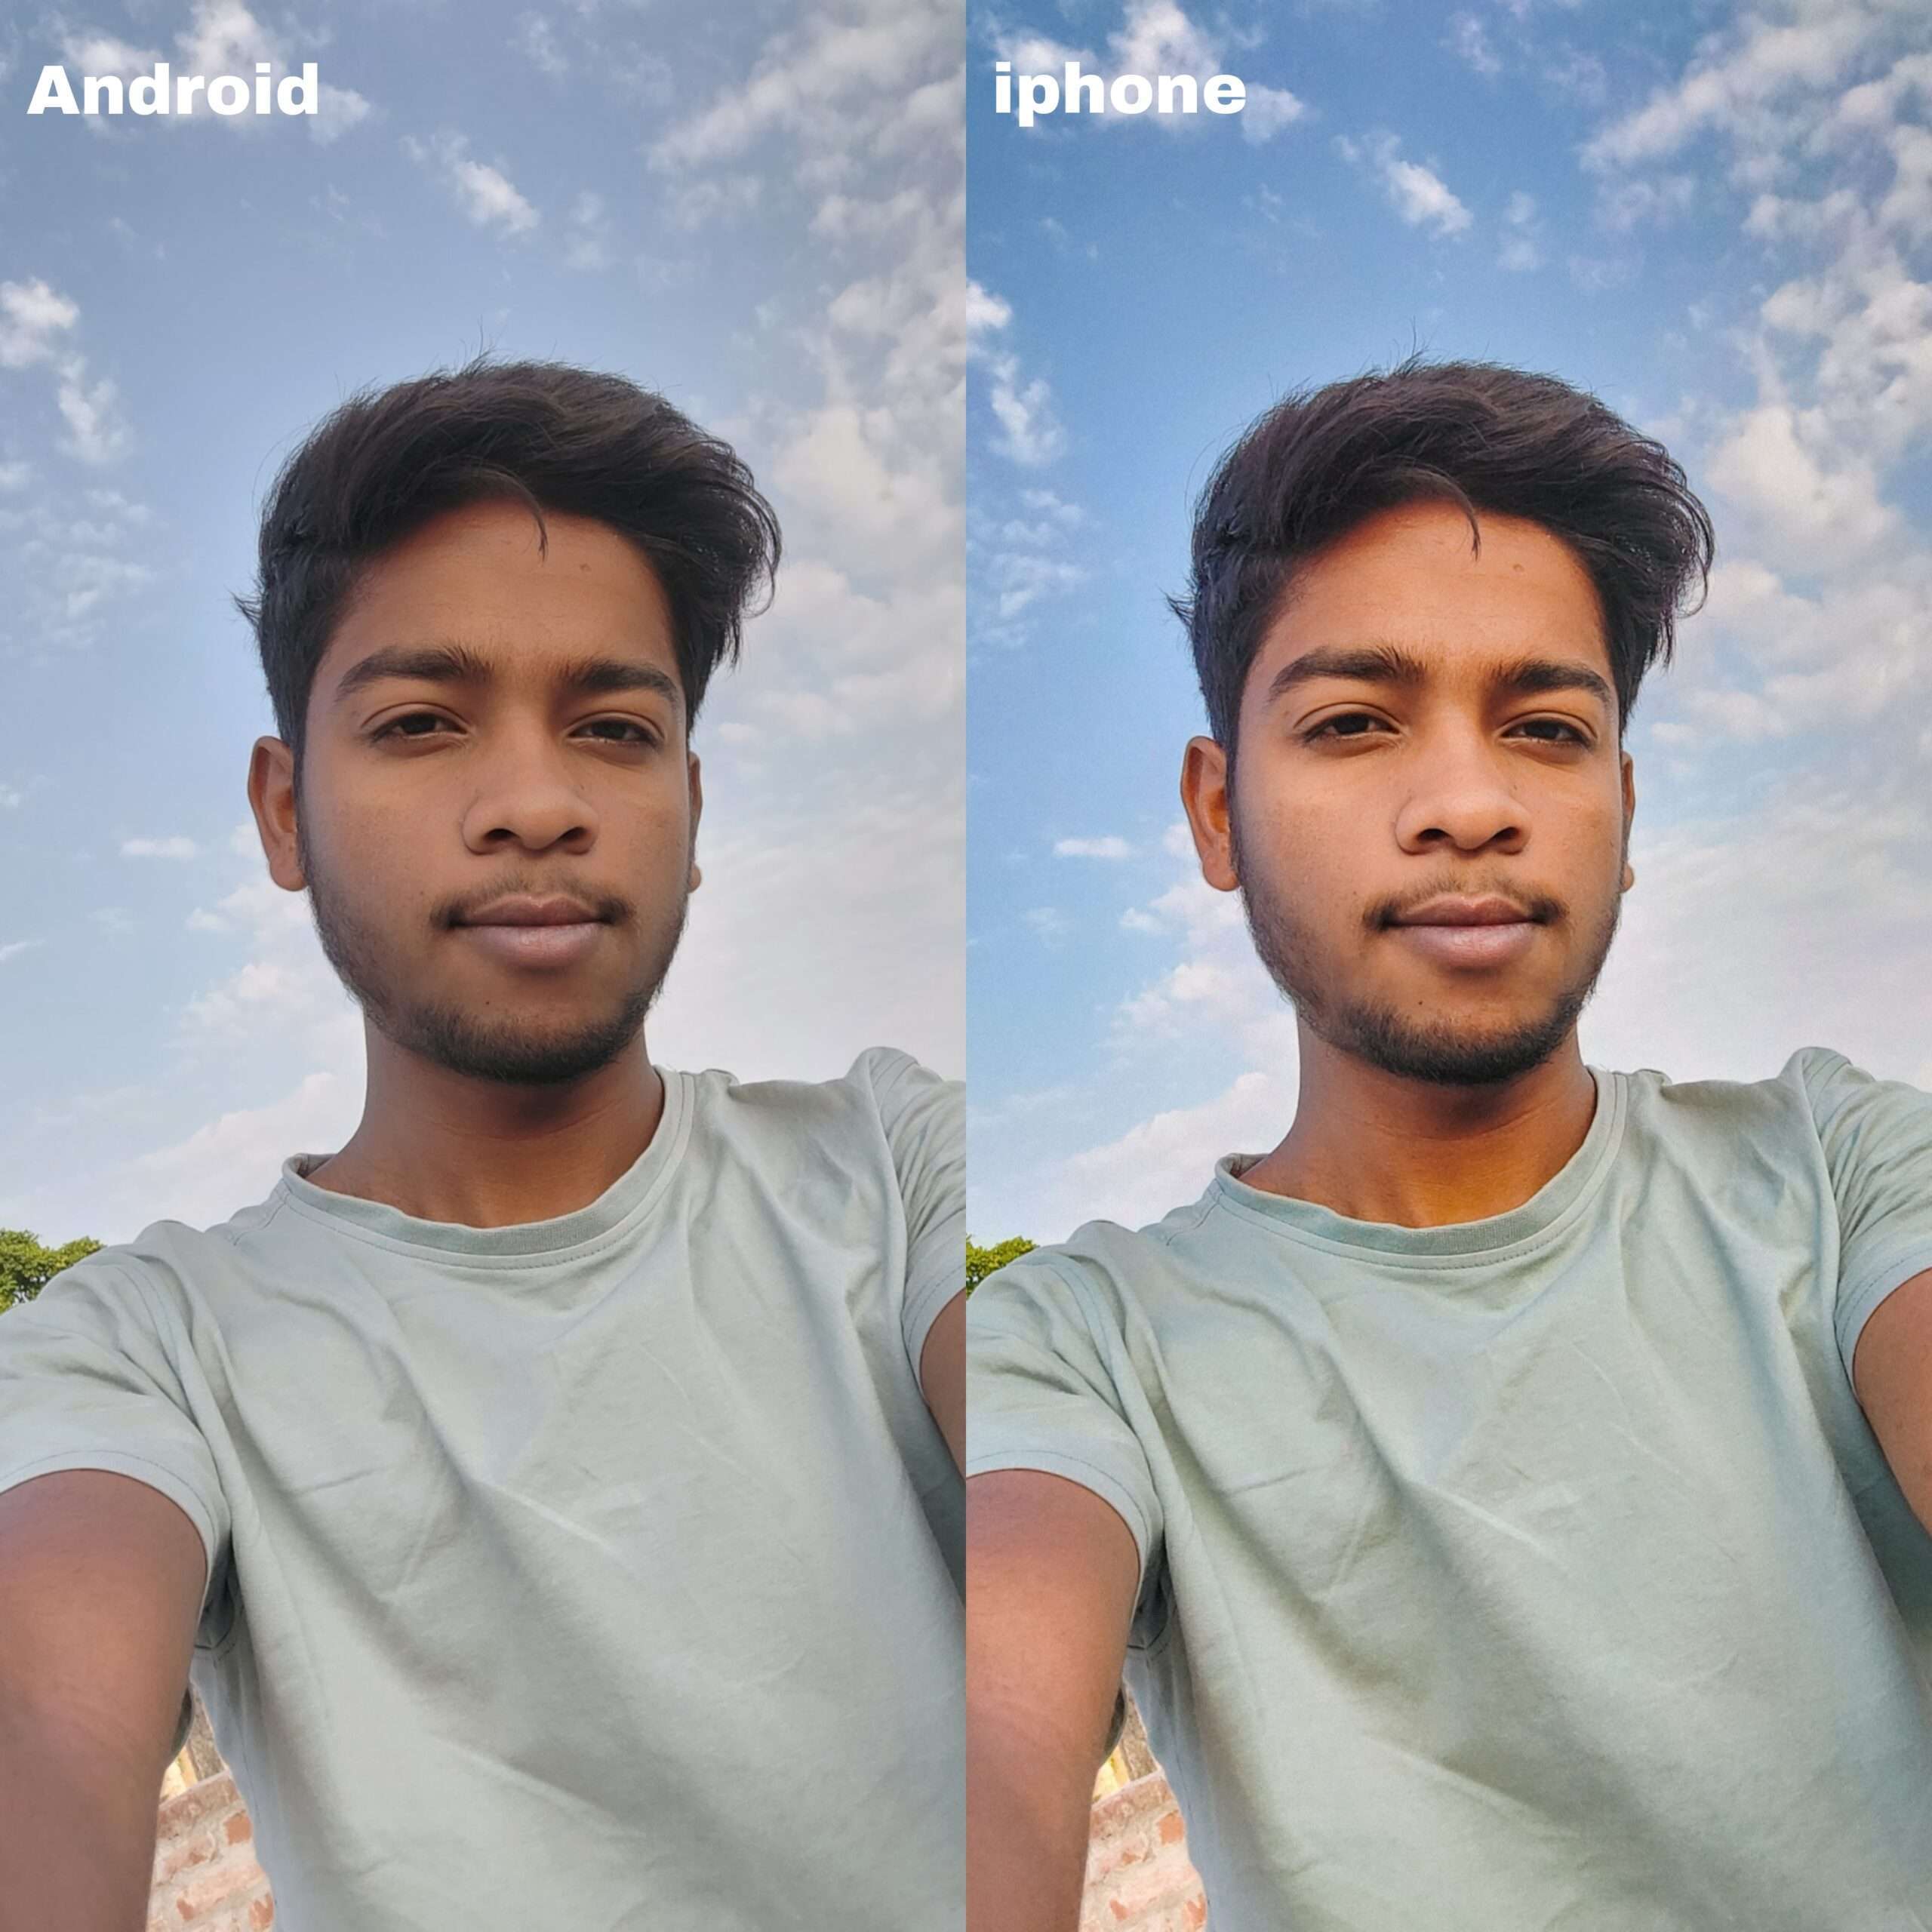 Difference between iPhone and Android image, iPhone Lightroom Presets 